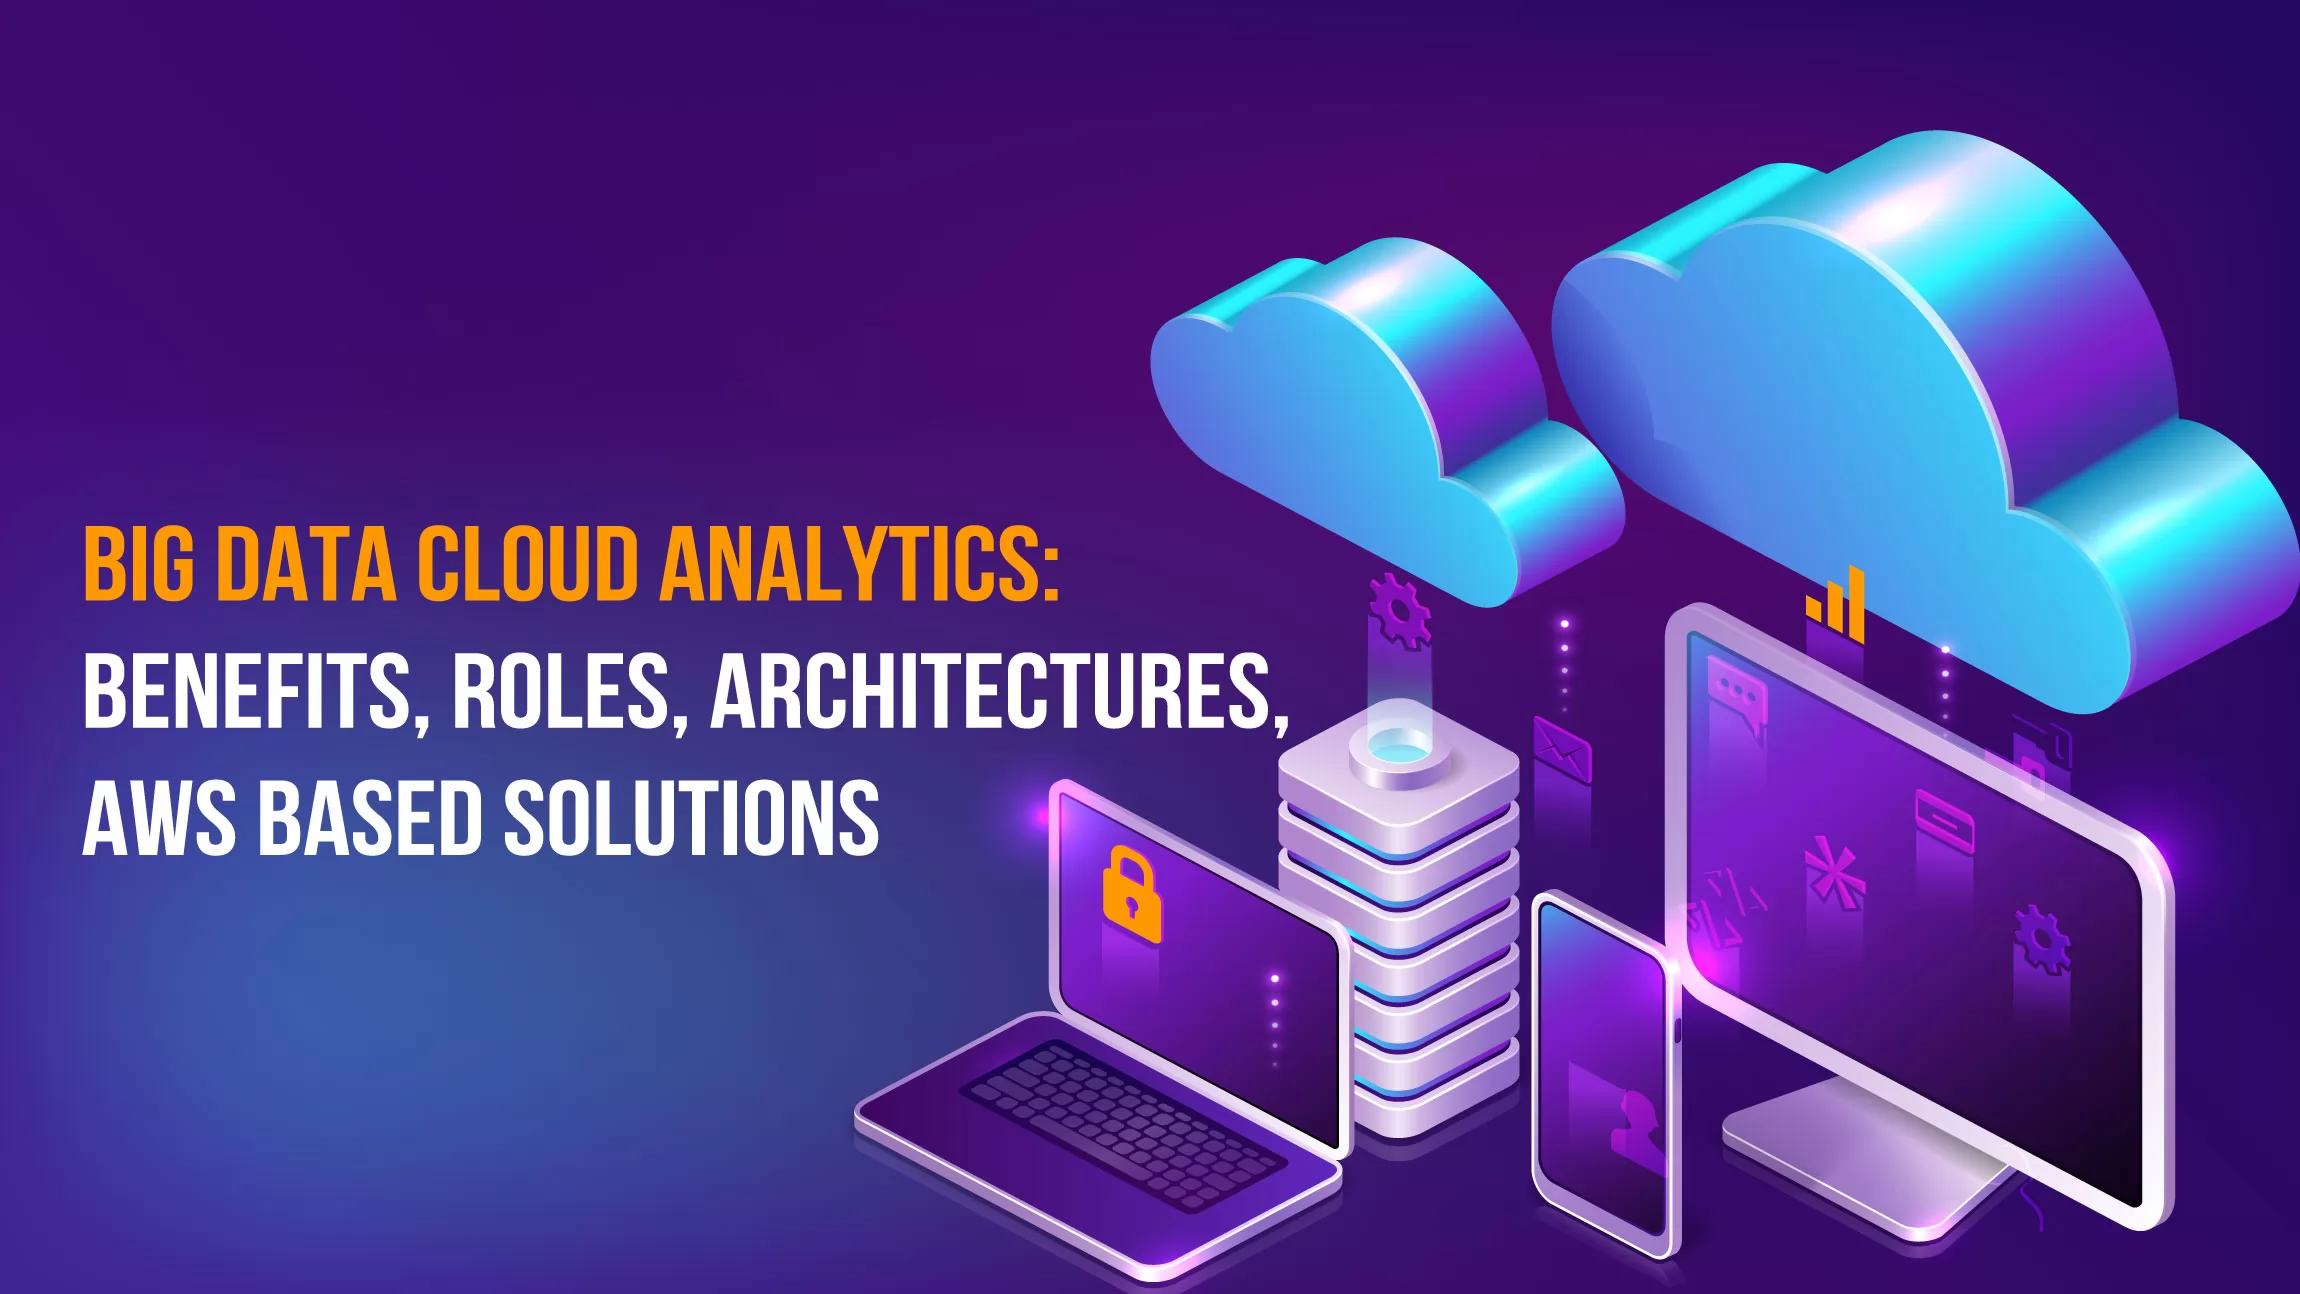 Big Data Cloud Analytics: Benefits, Roles, AWS based solutions